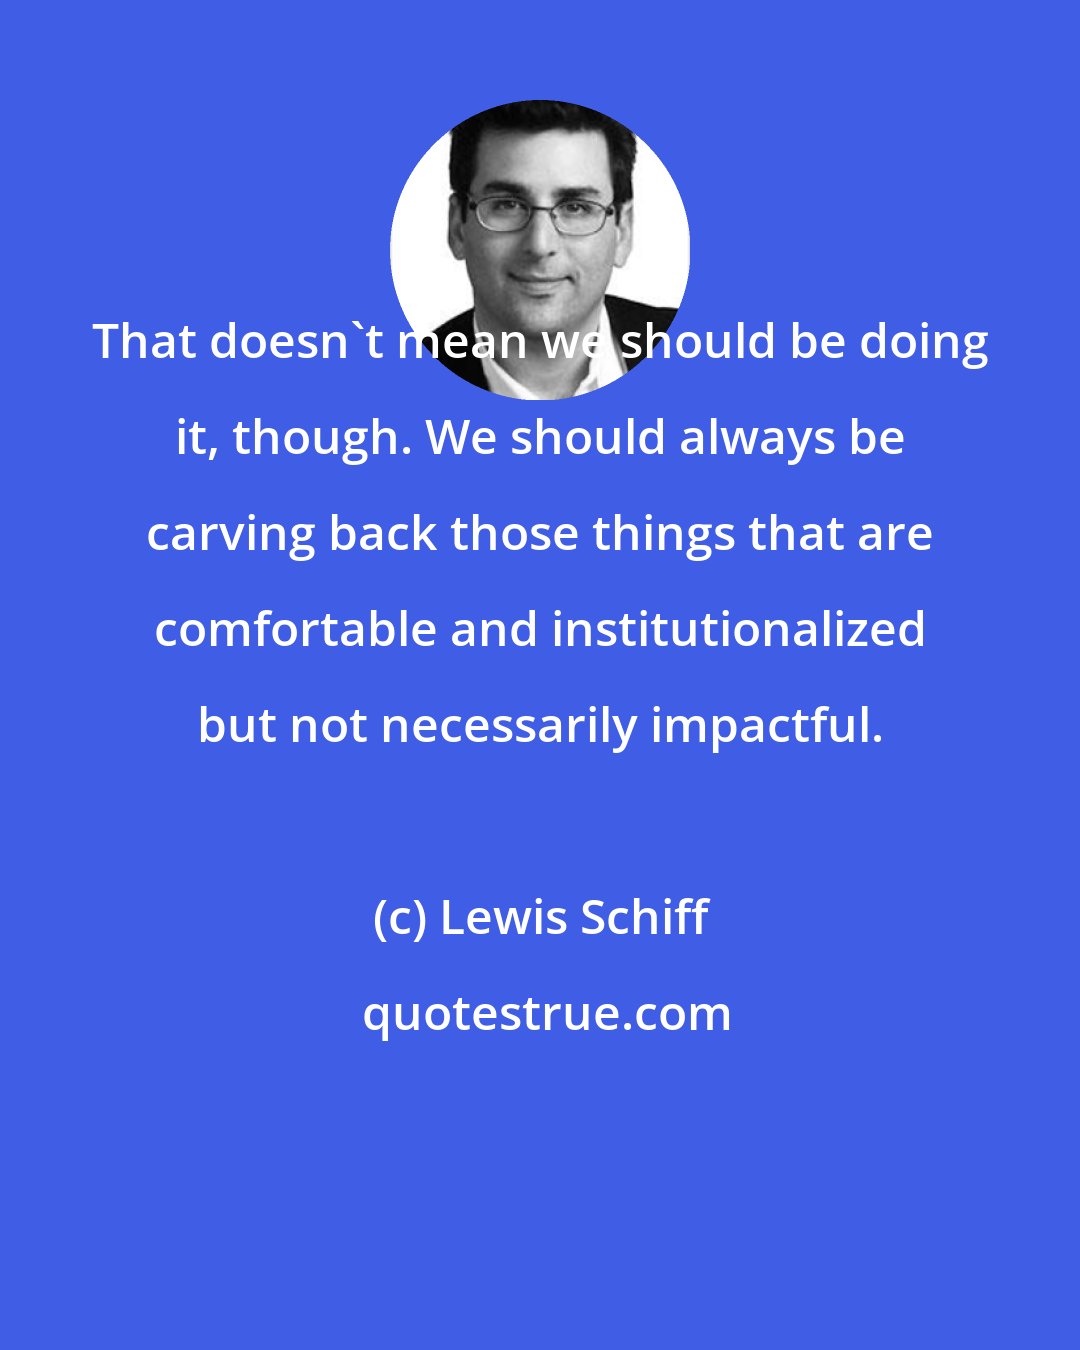 Lewis Schiff: That doesn't mean we should be doing it, though. We should always be carving back those things that are comfortable and institutionalized but not necessarily impactful.